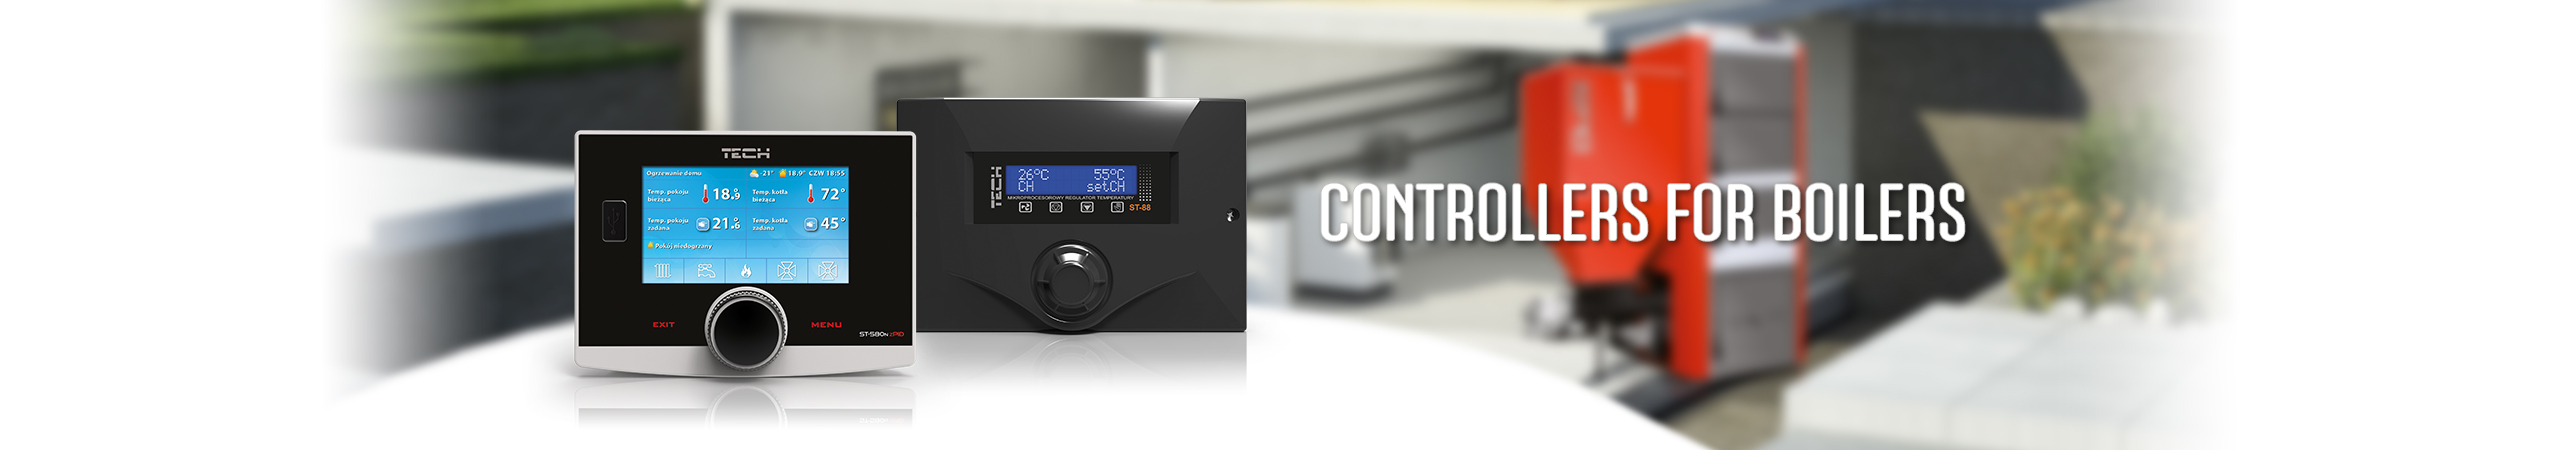 Controllers for boilers, boiler thermostat, central heating controls - TECH Controllers - TECH Sterowniki